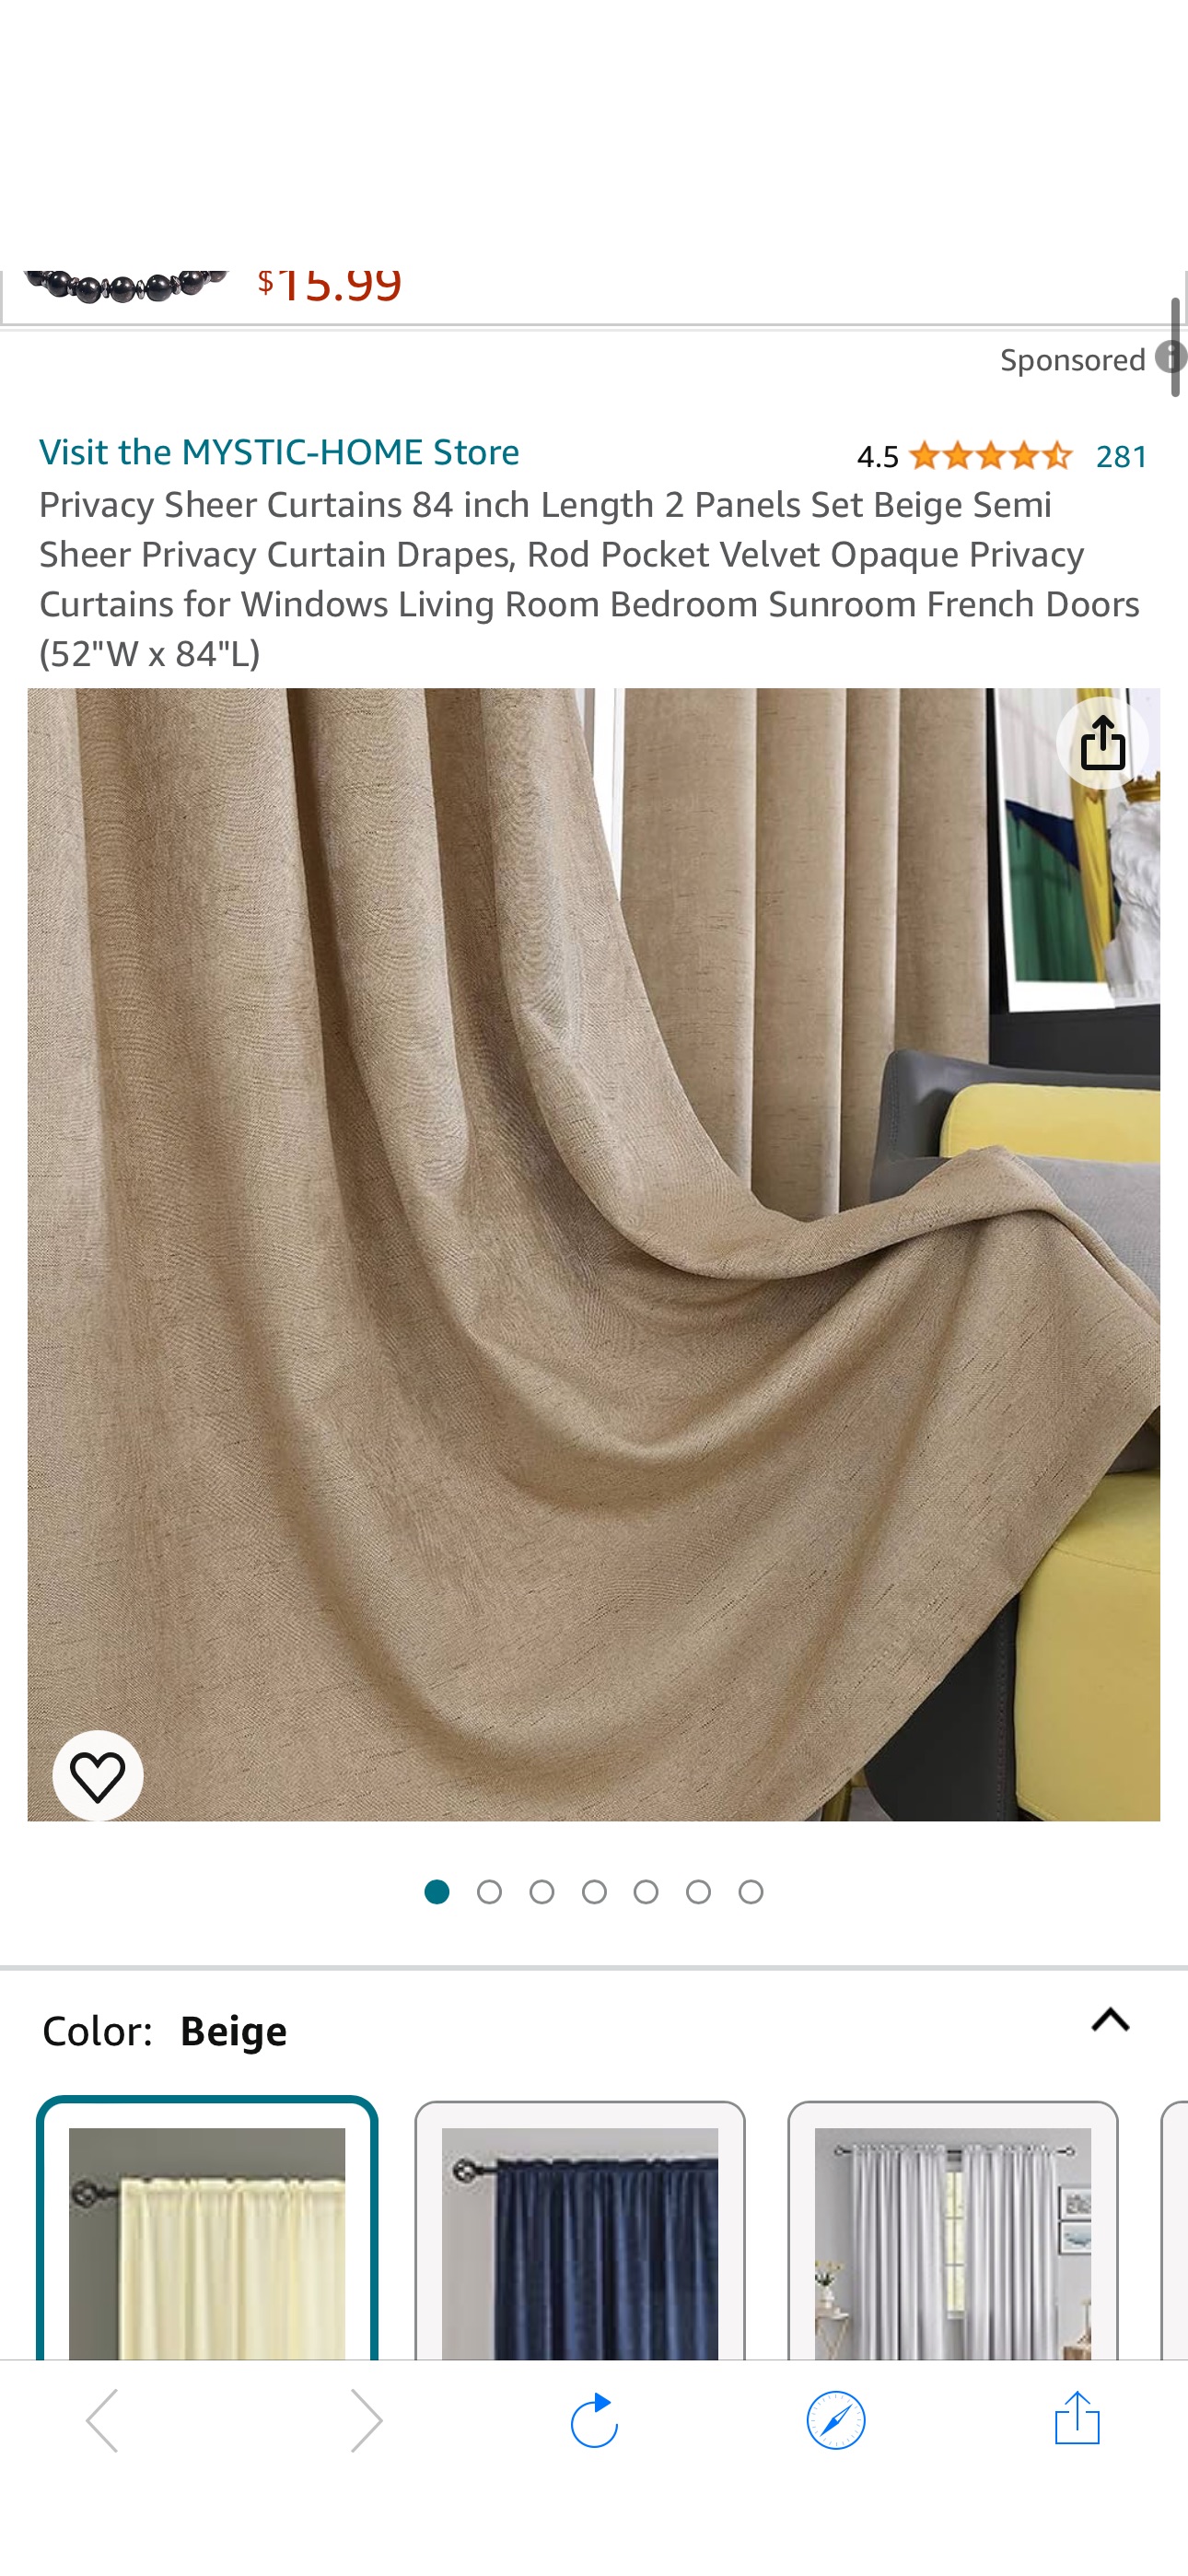 Amazon.com: Privacy Sheer Curtains 84 inch Length 2 Panels Set Beige Semi Sheer Privacy Curtain Drapes, Rod Pocket Velvet Opaque Privacy Curtains for Windows Living Room Bedroom Sunroom French Doors (